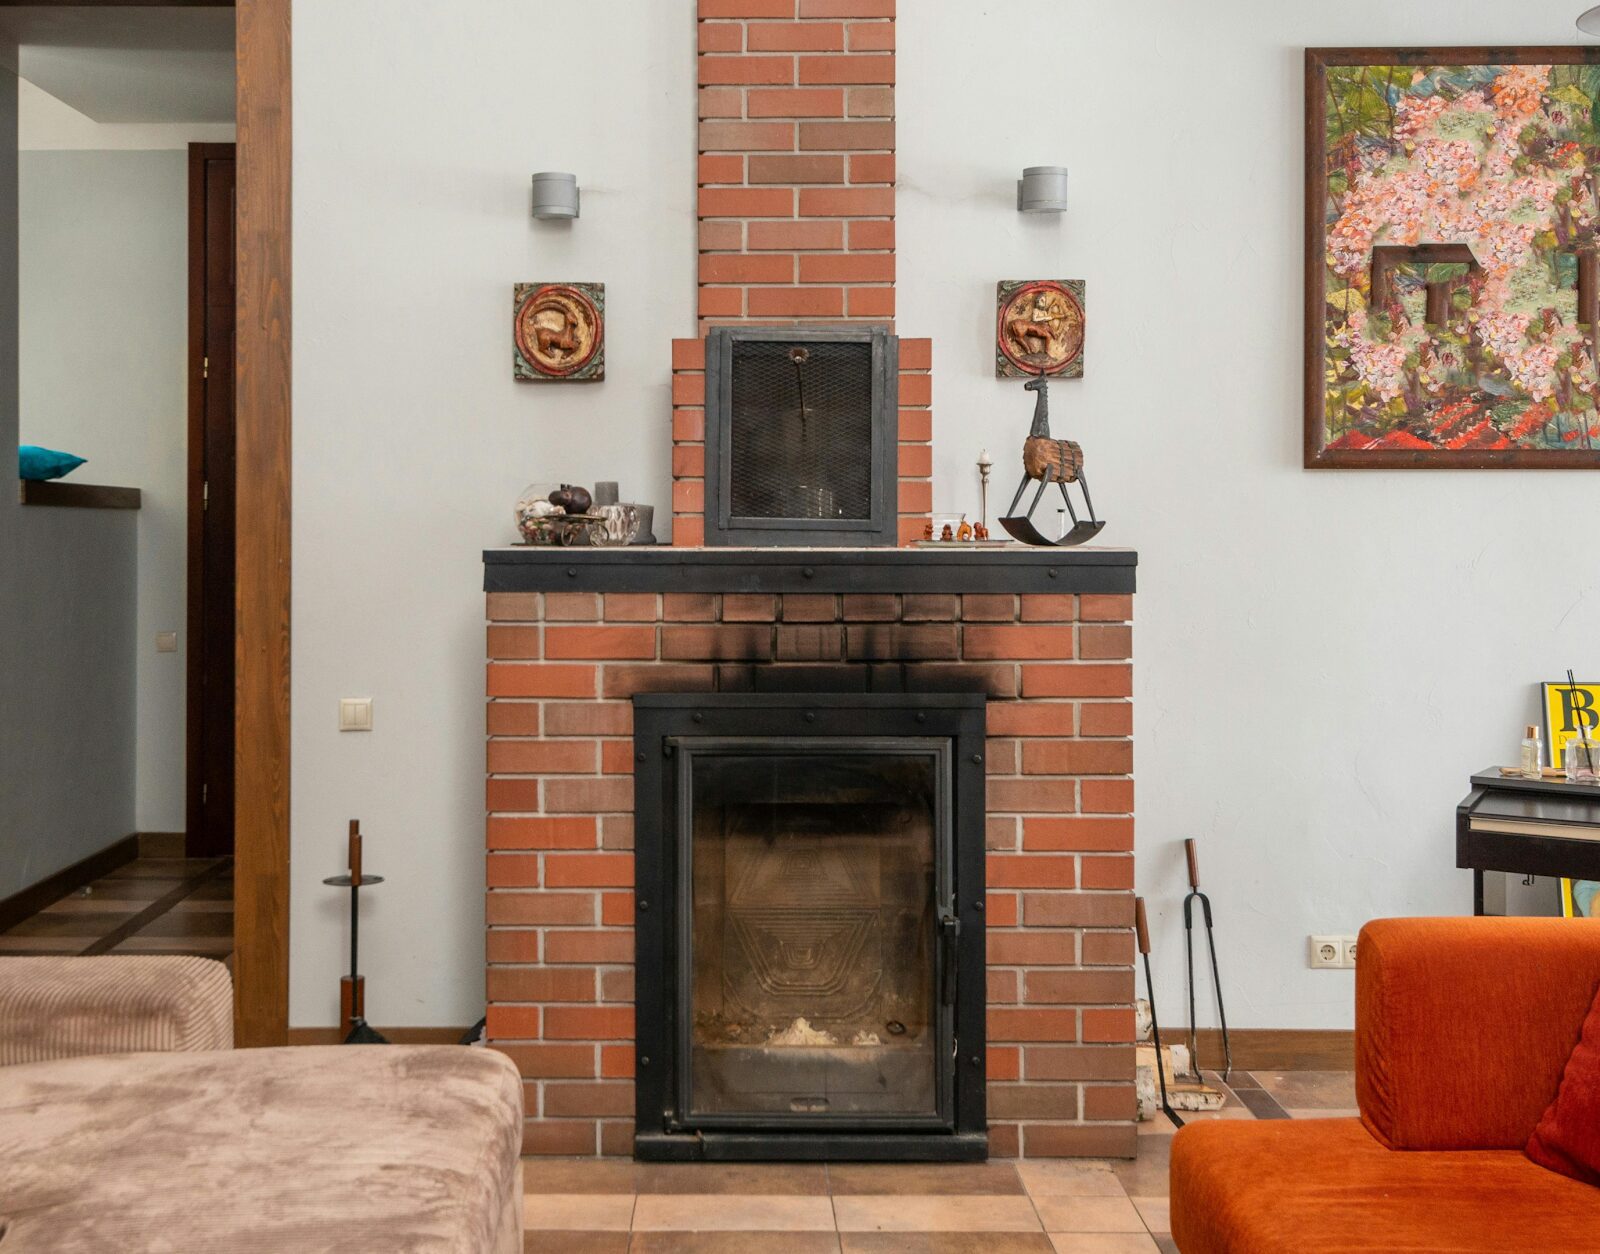 https://www.pexels.com/photo/brick-fireplace-near-couches-in-apartment-6296921/